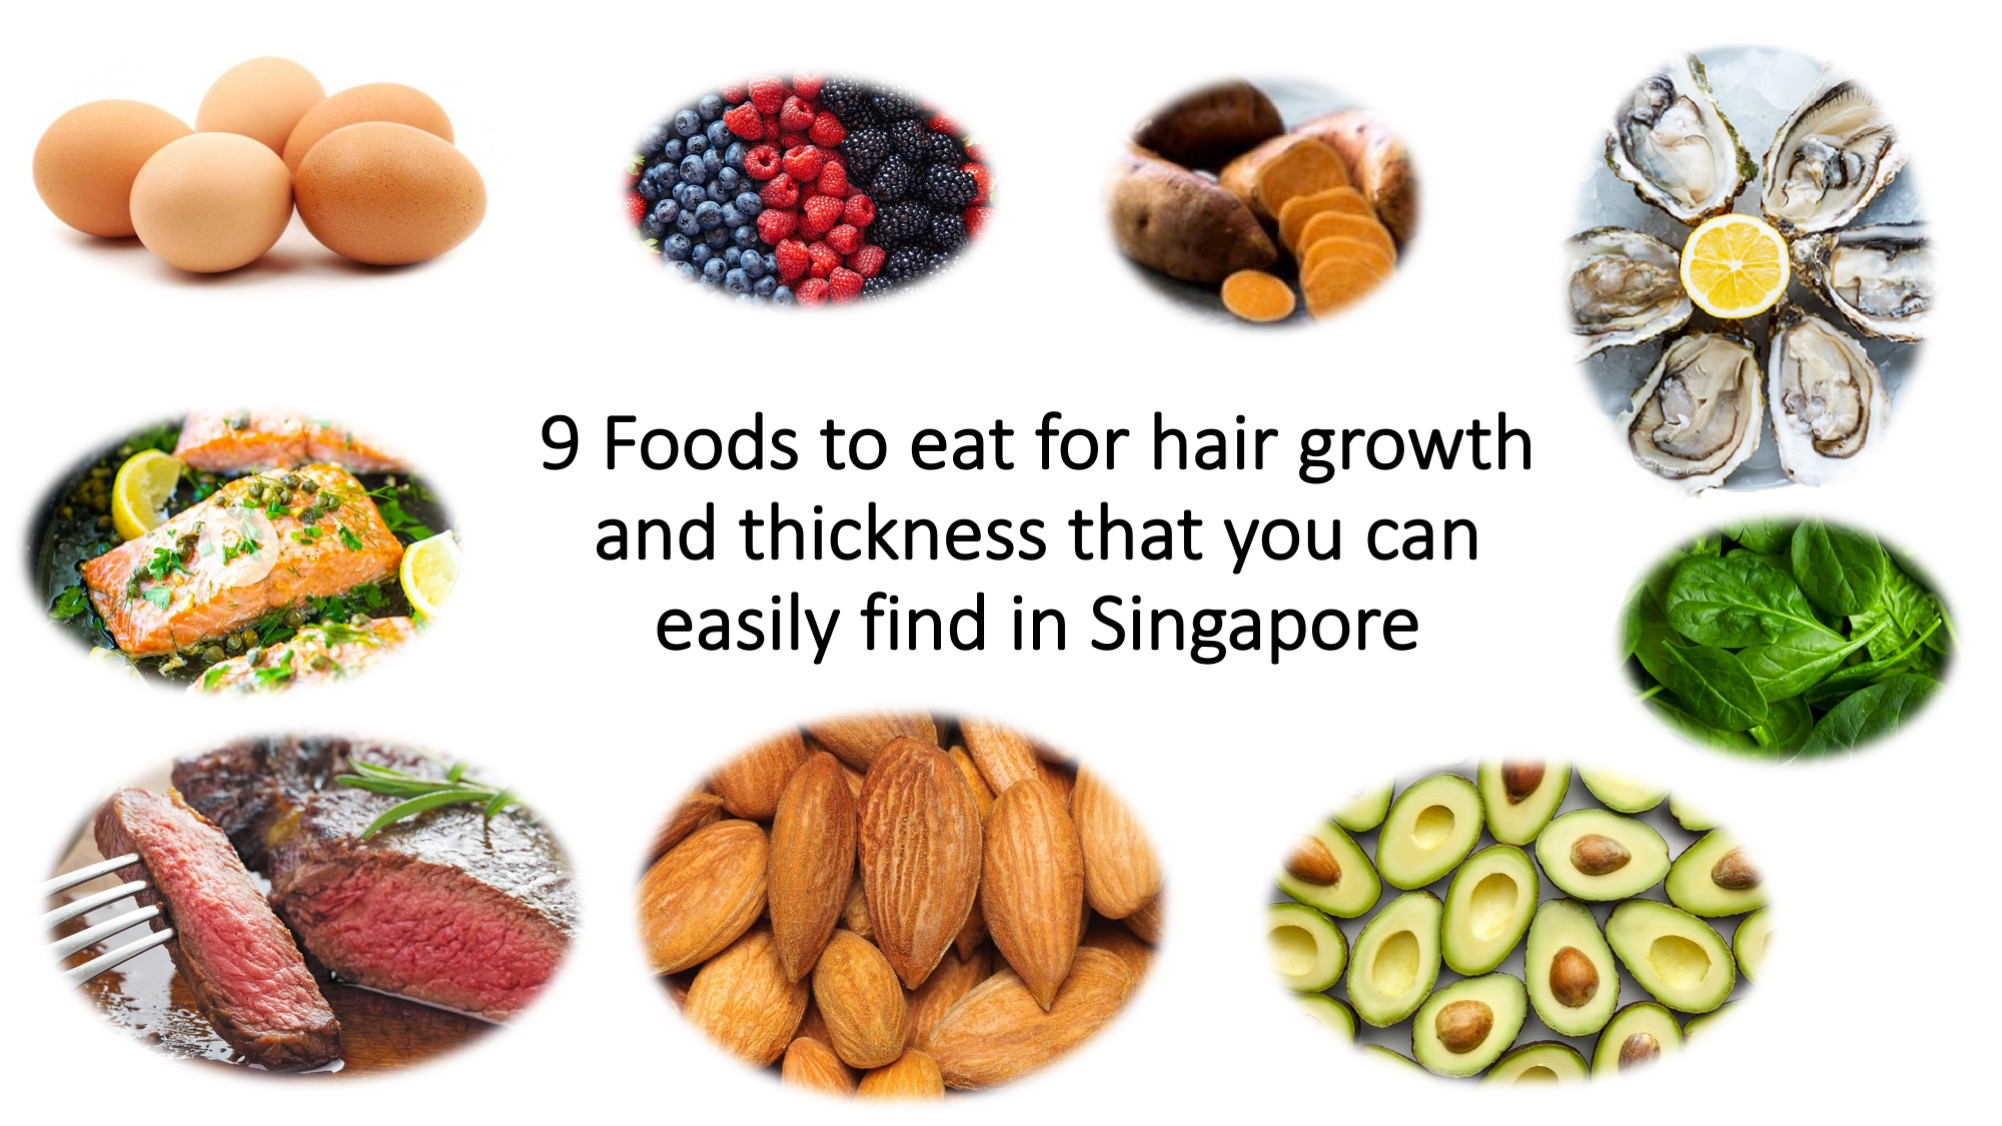 Helping Hands Top 10 Superfoods To Prevent Hair Loss